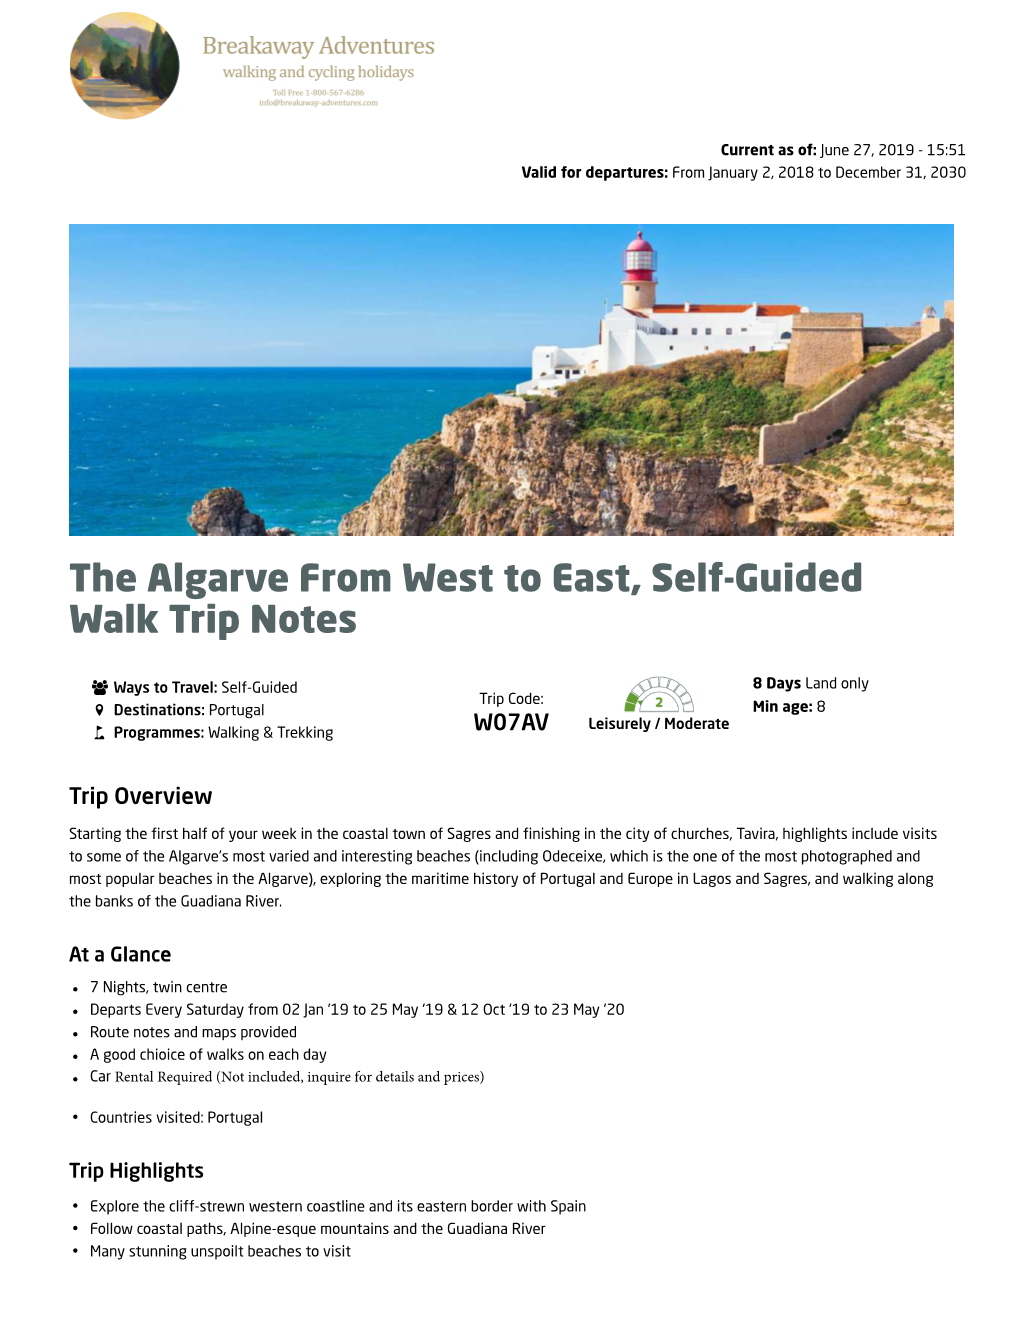 The Algarve from West to East, Self-Guided Walk Trip Notes